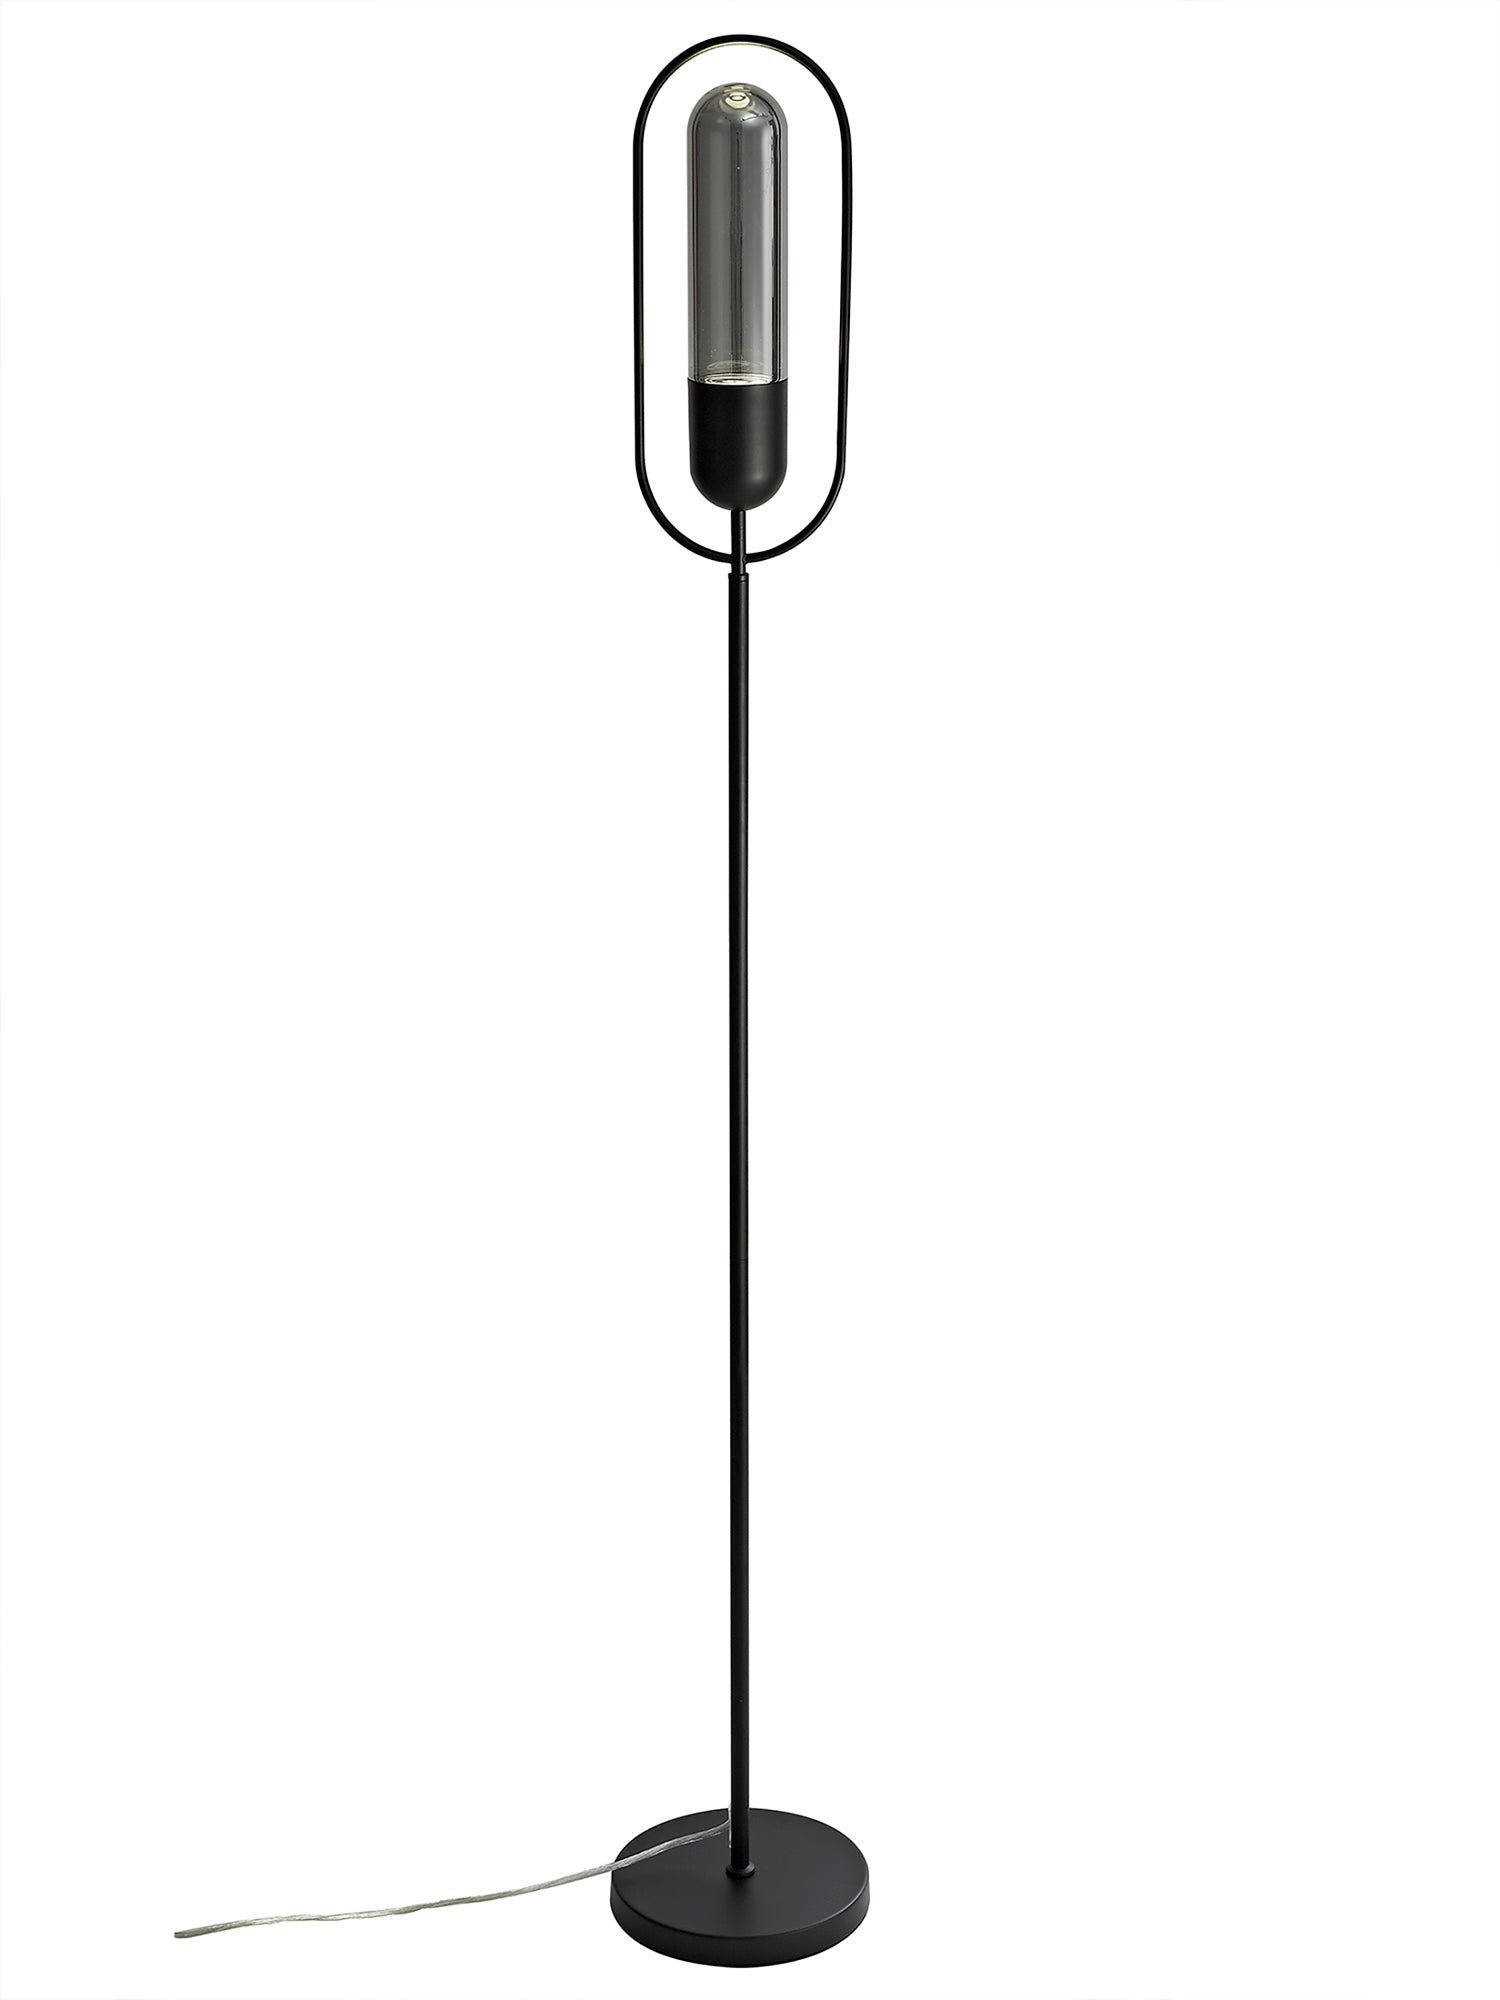 Tienes Floor Lamp, 1 x 7W LED, 4000K, 790lm, Antique Brass/Amber, Satin Nickel/Clear, Black/Smoked, 3yrs Warranty